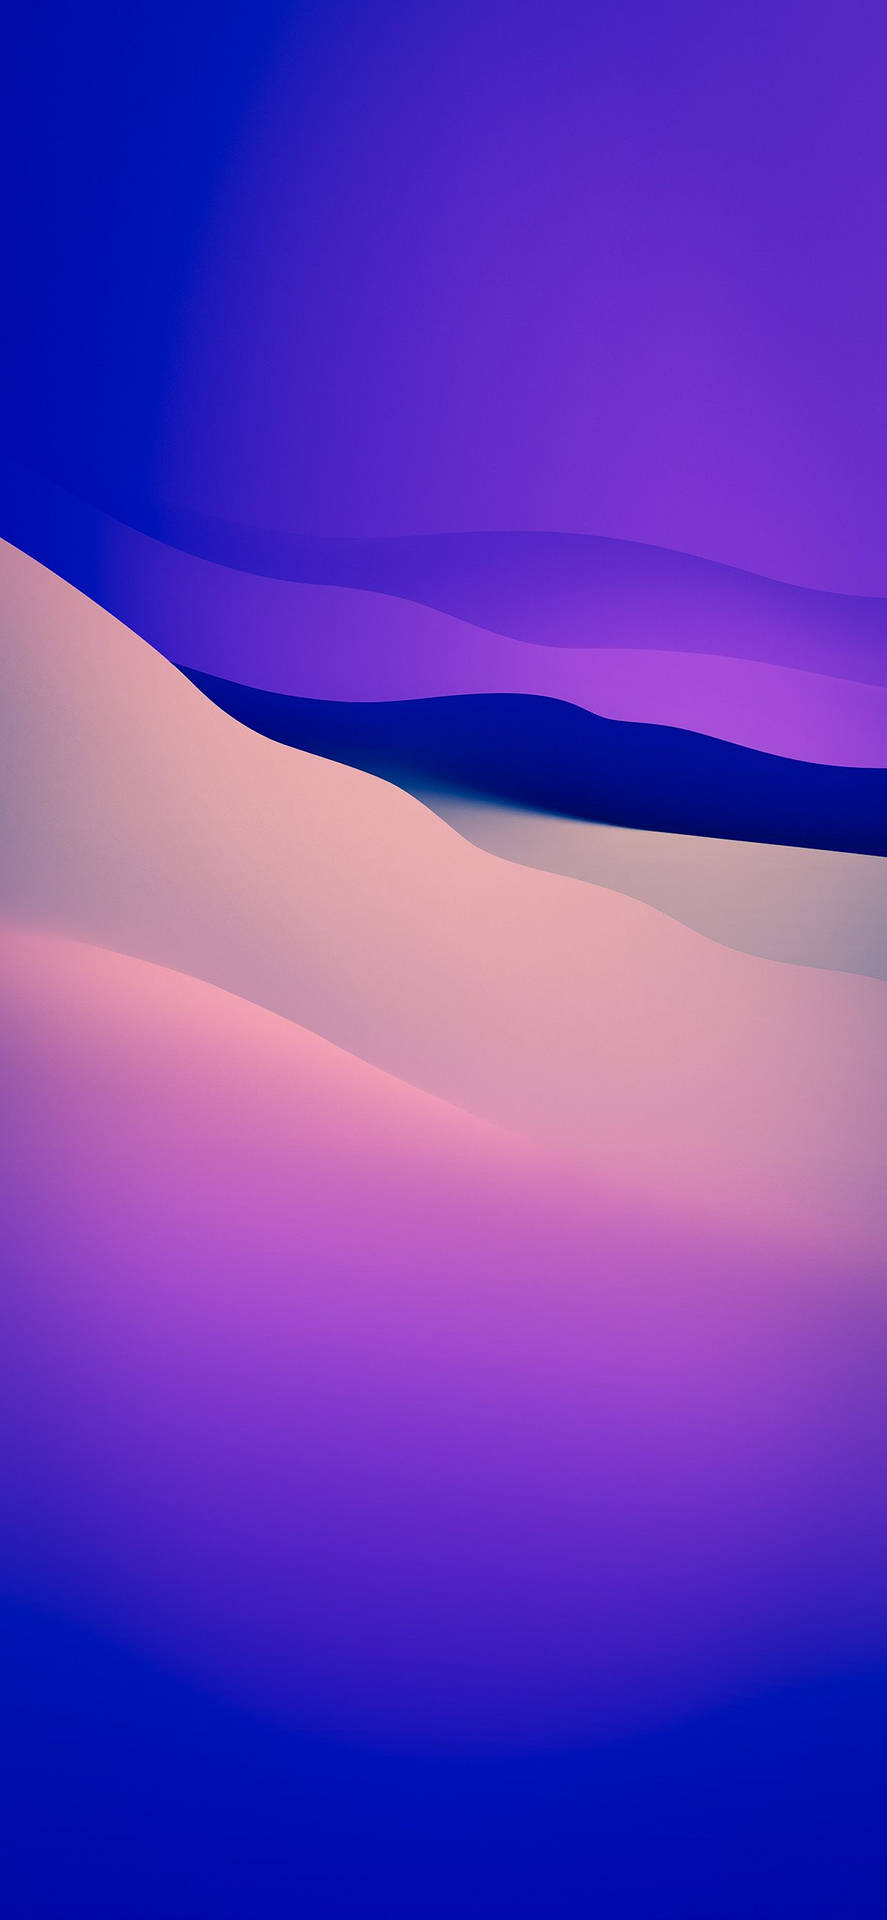 Download: iPhone 1 to iPhone 14 Wallpapers [Full Collection]